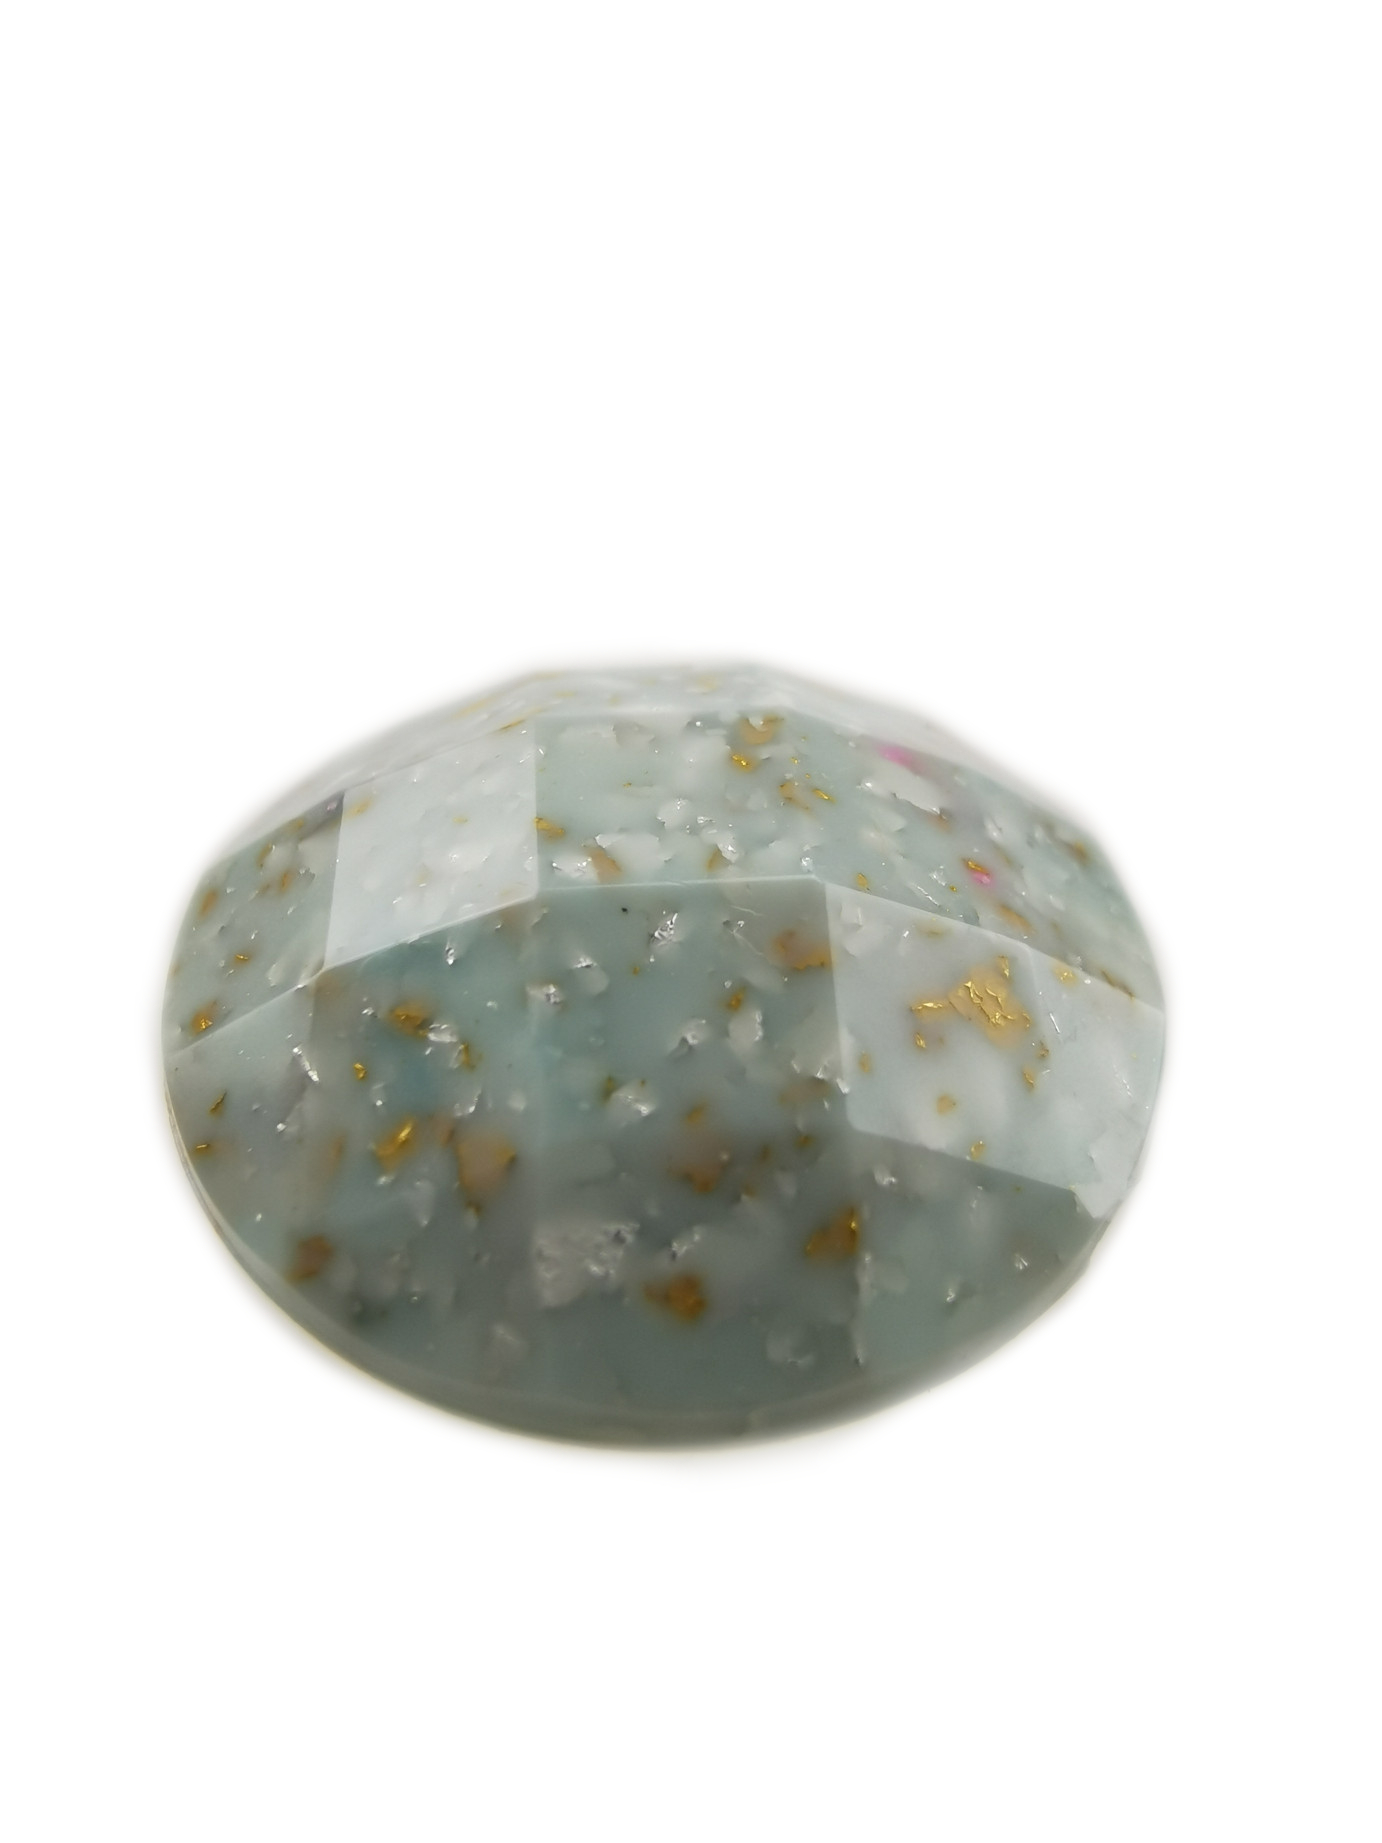 Pistachio White Round Orgone Shield with Gold and Silver by OrgoneVibes